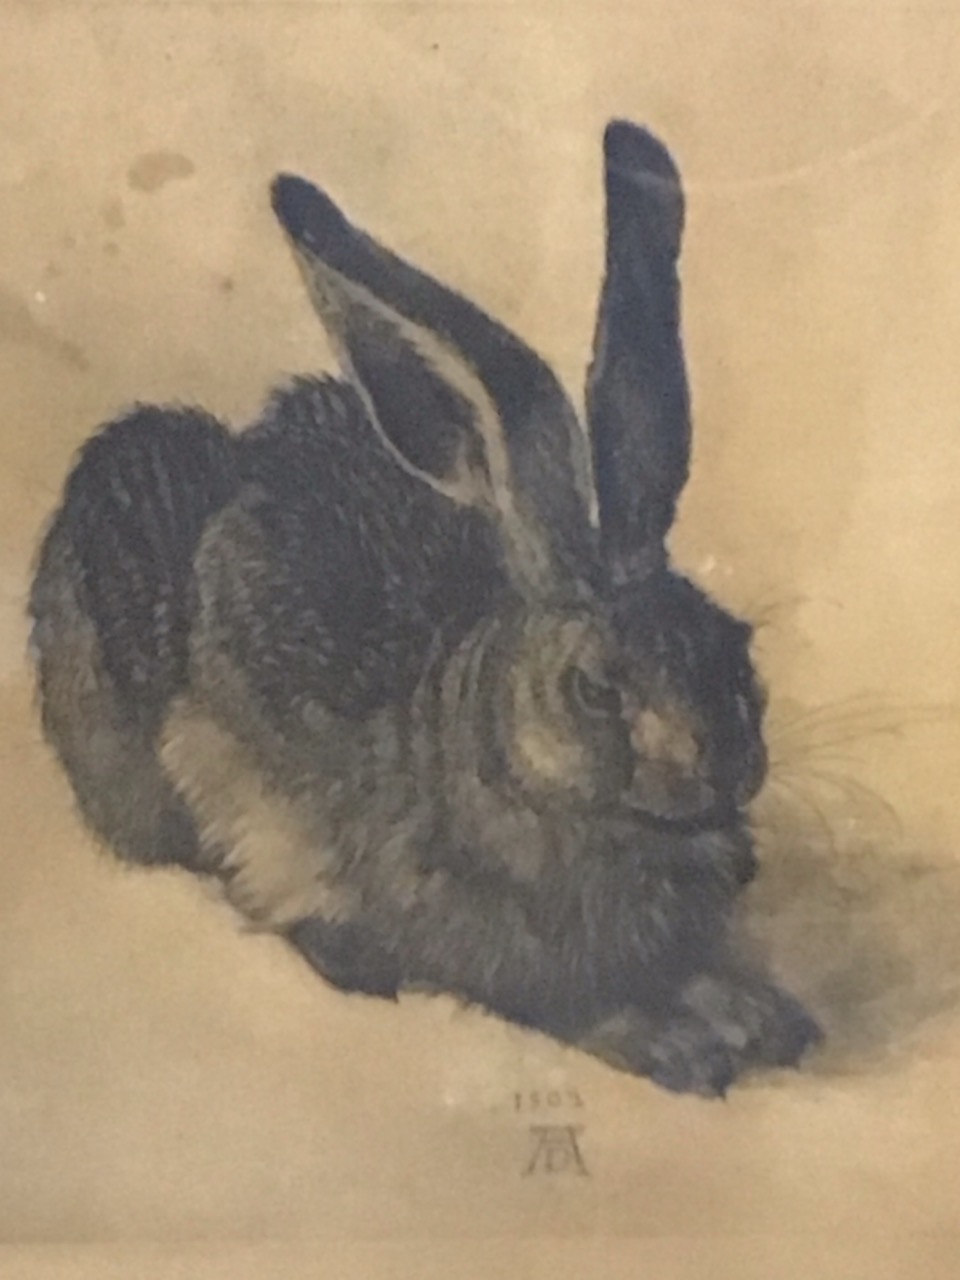 Albrecht Durer, photogravure, the Young Hare, published by Reinthal & Newman - New York, monogrammed - Image 2 of 3